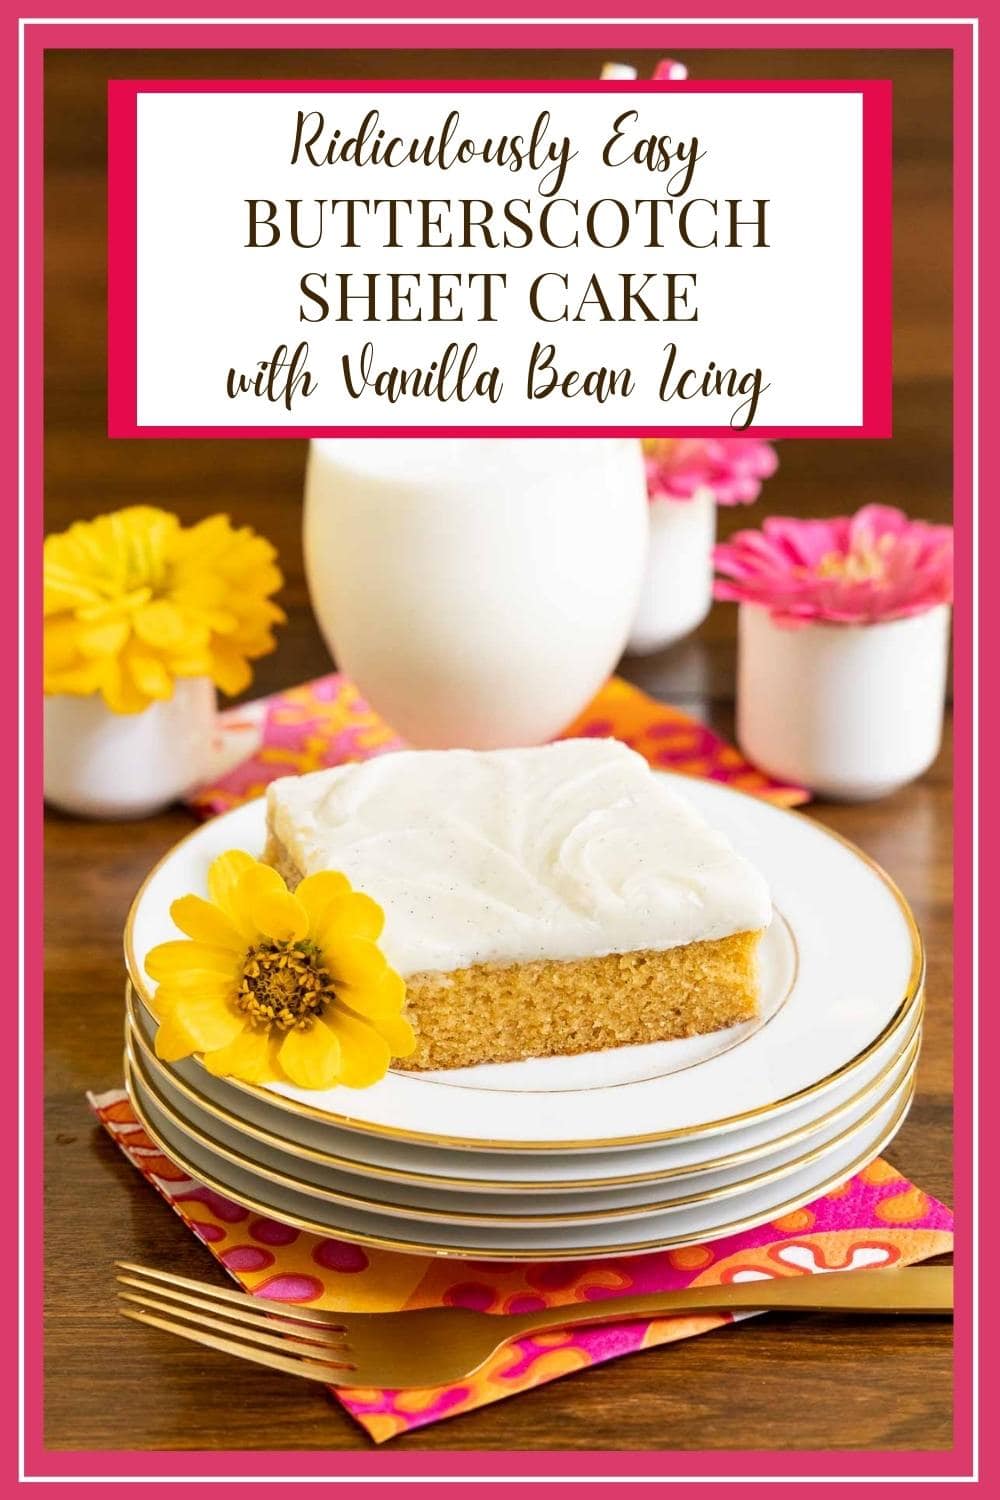 Ridiculously Easy Butterscotch Sheet Cake with Vanilla Bean Icing